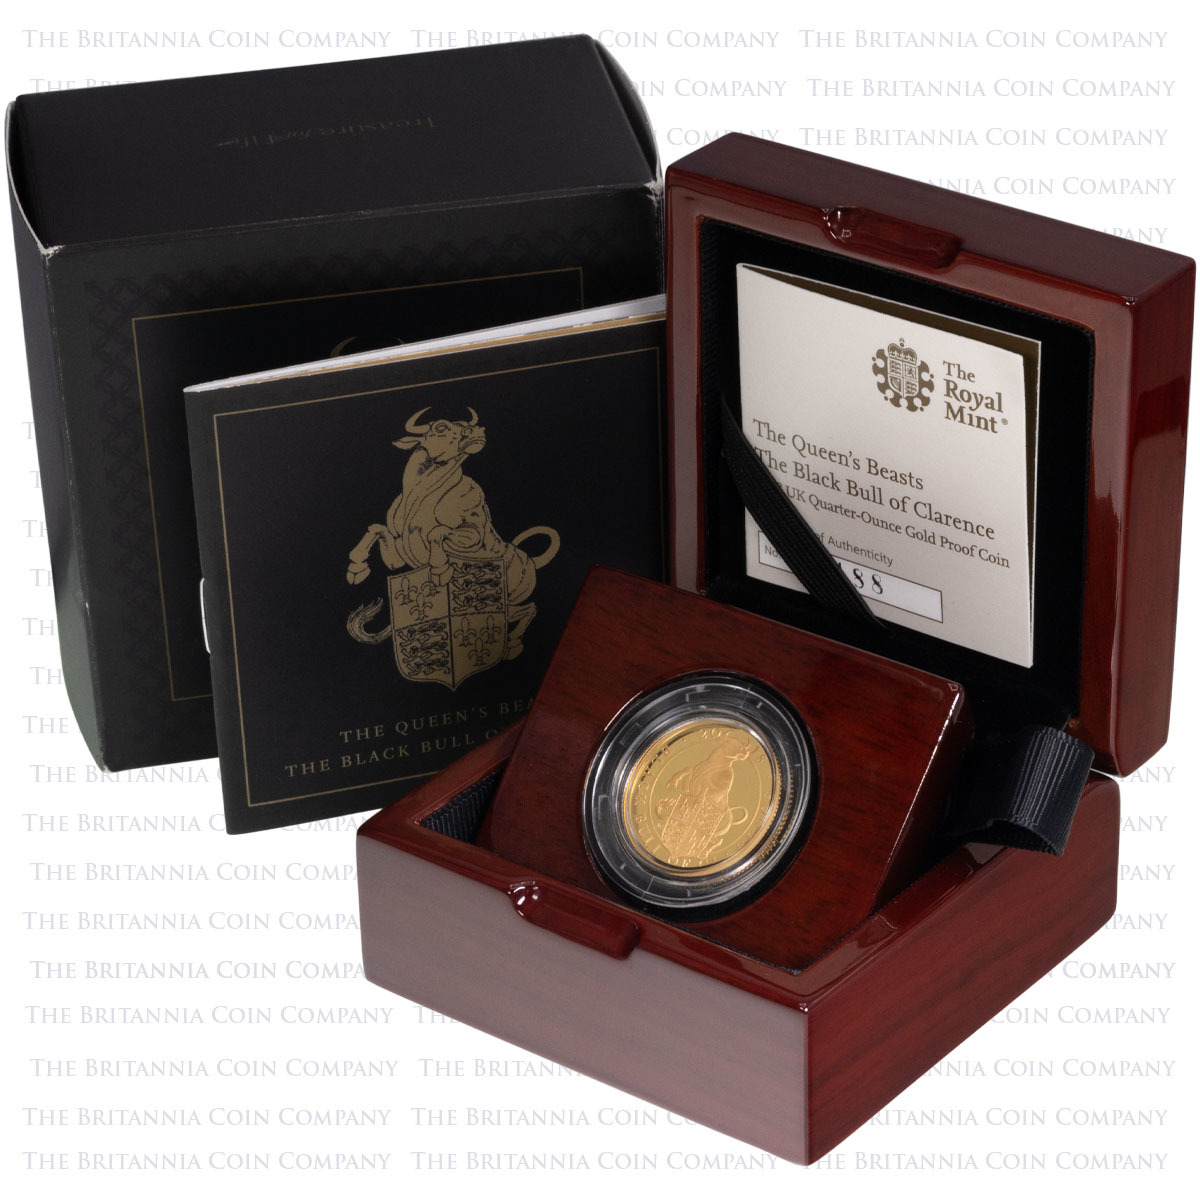 UK18QBQO 2018 Queen's Beasts Black Bull Of Clarence Quarter Ounce Gold Proof Coin Boxed